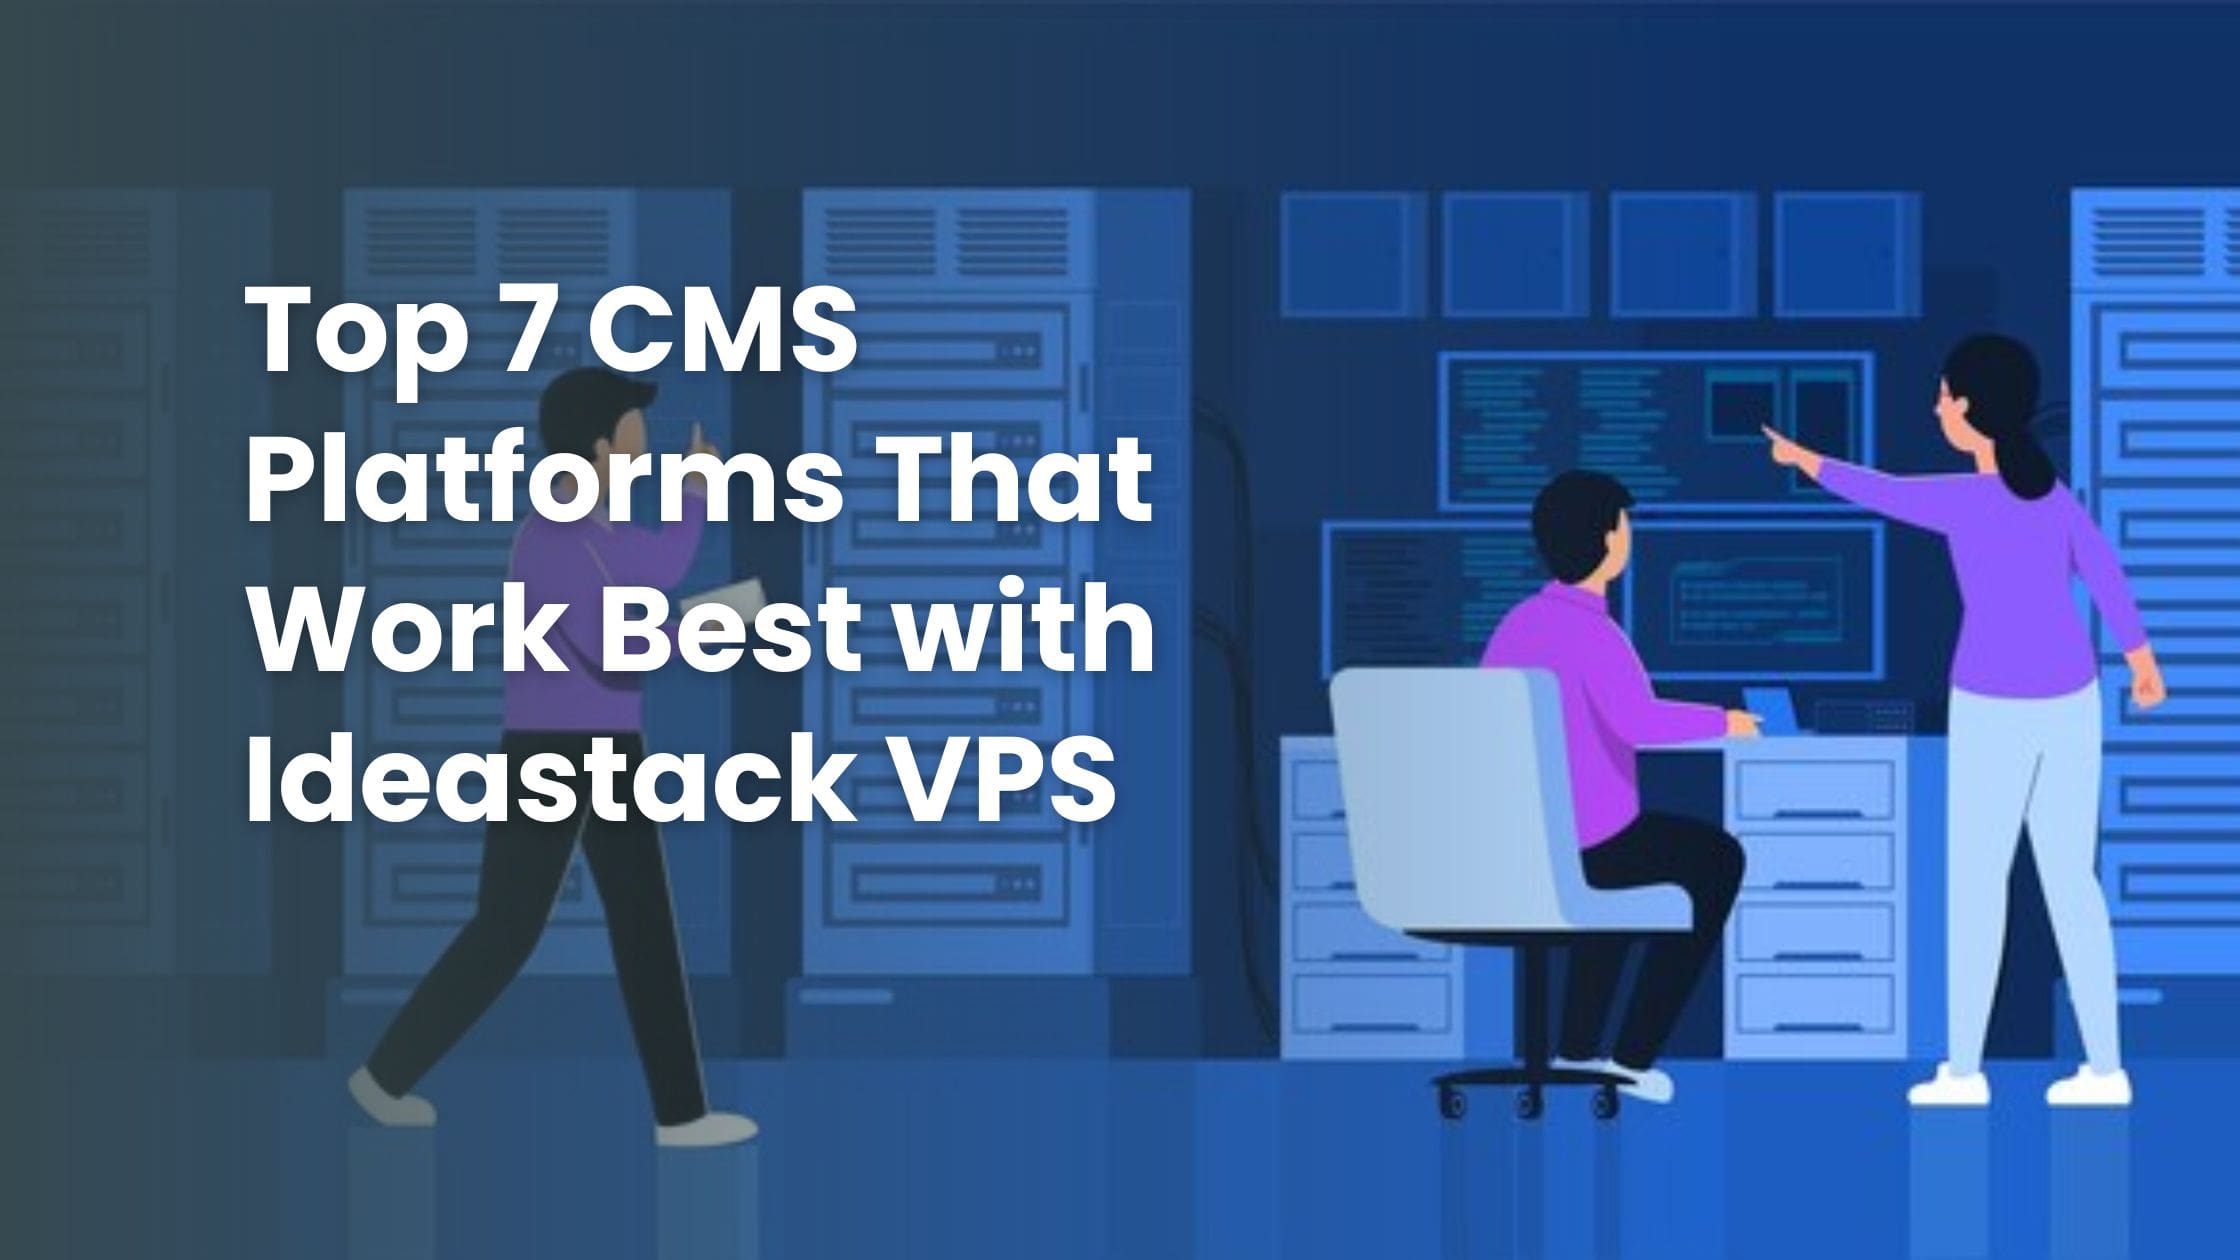 Top 7 CMS Platforms That Work Best with Ideastack VPS